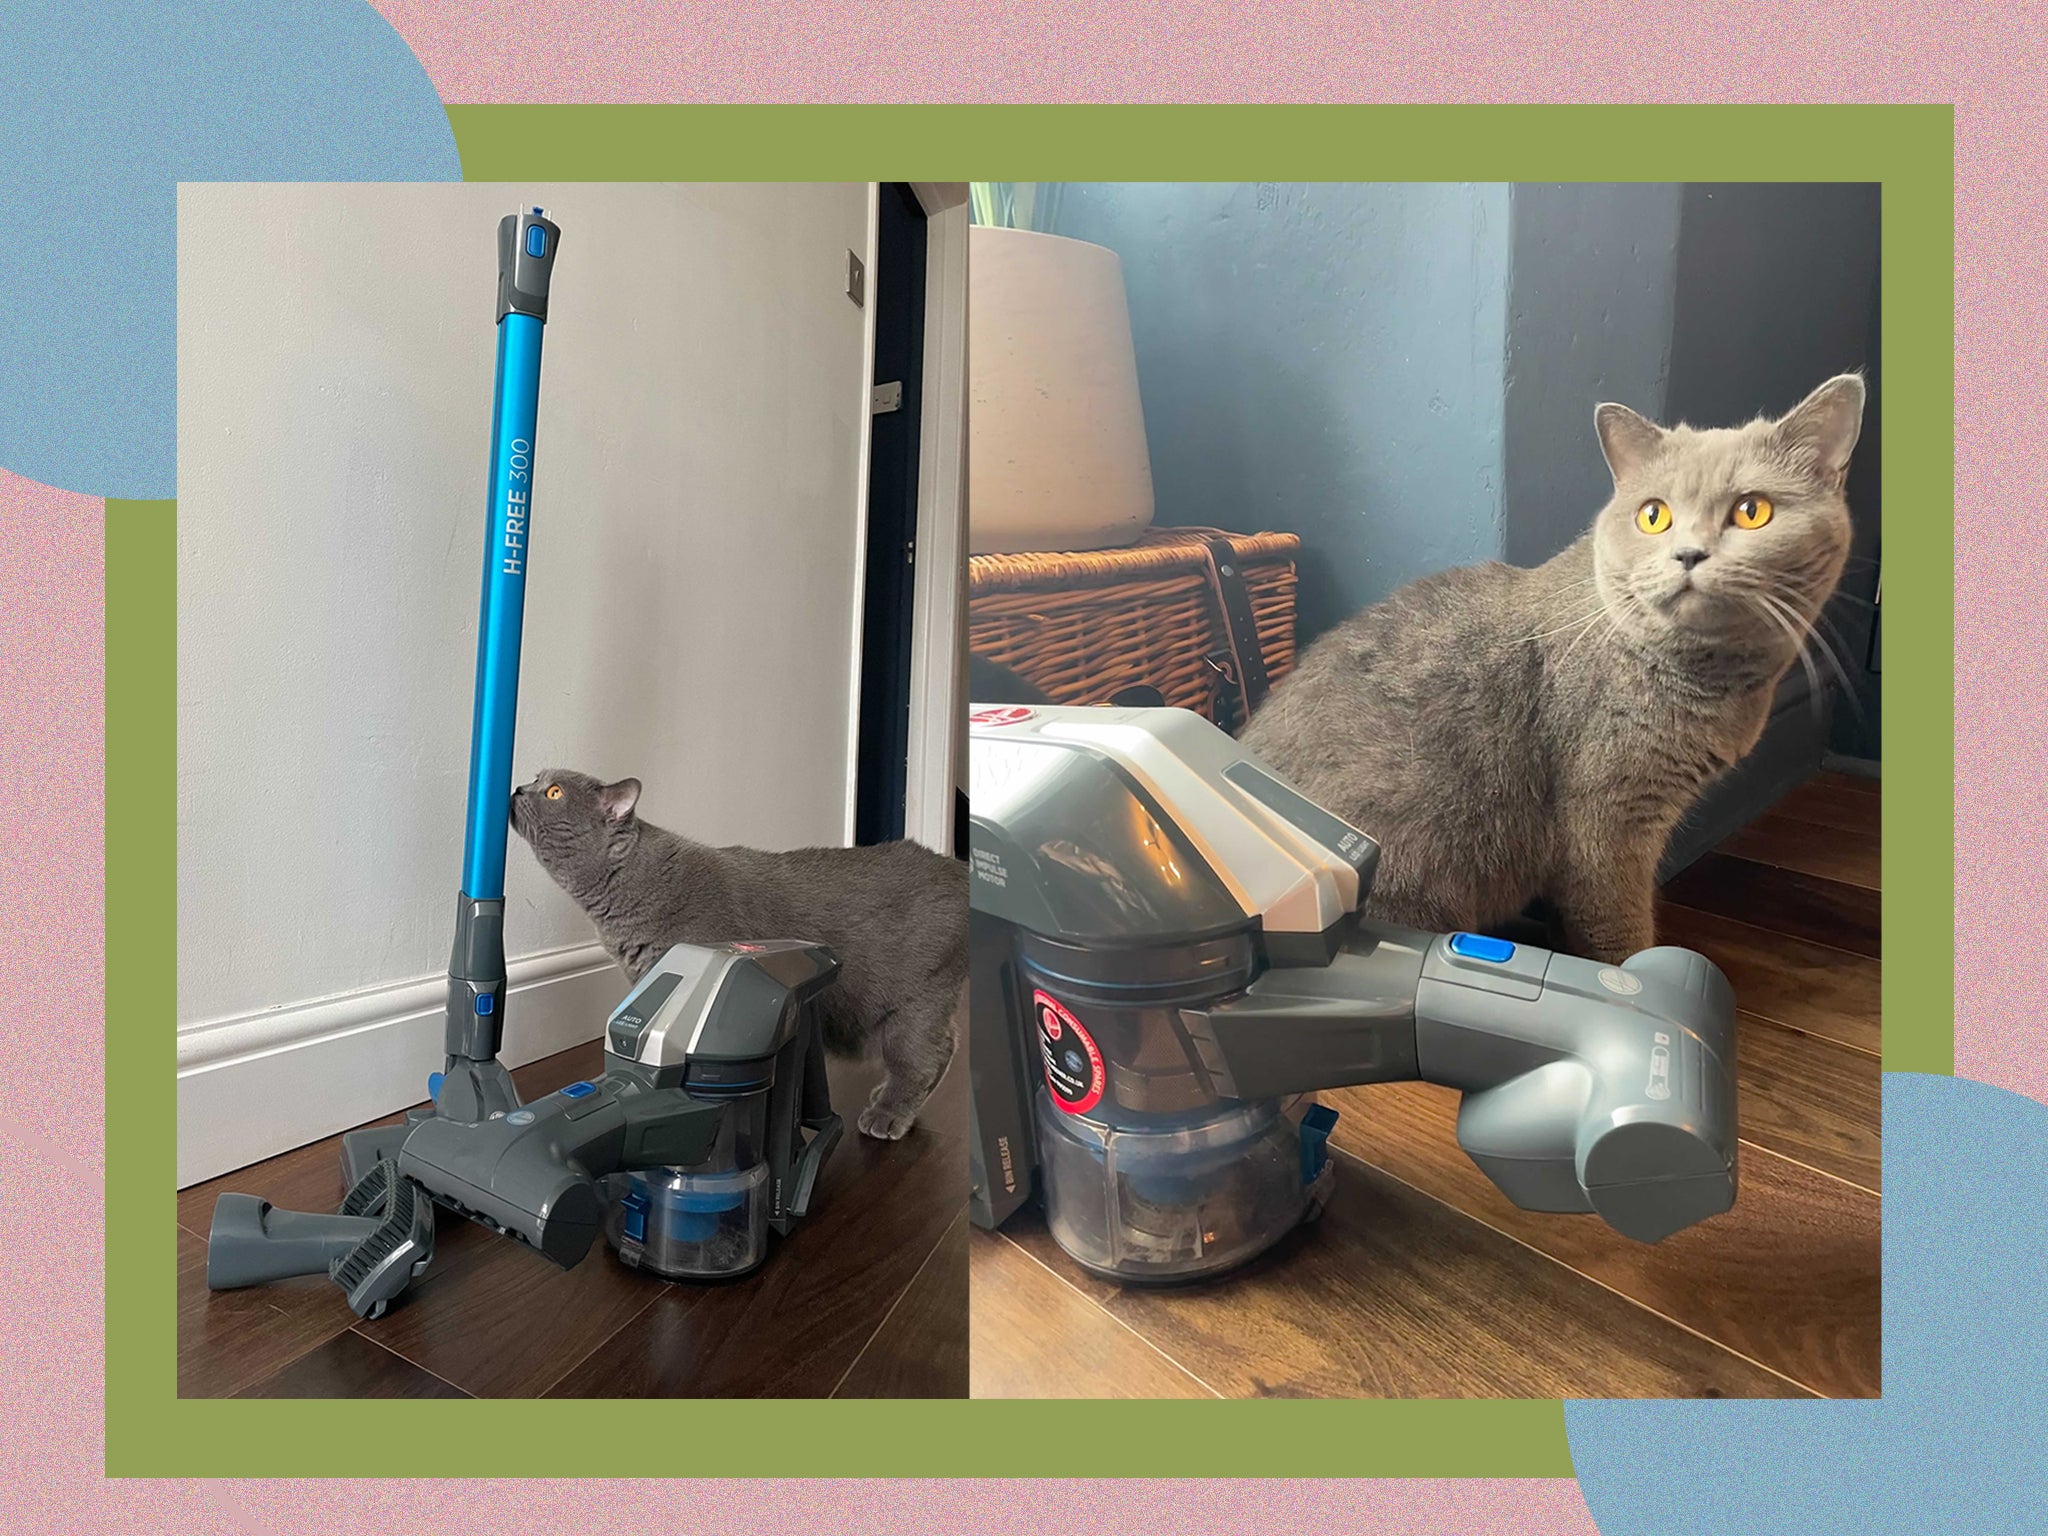 Hoover H-Free 300 pets cordless vacuum: We review the brand's  budget-friendly model